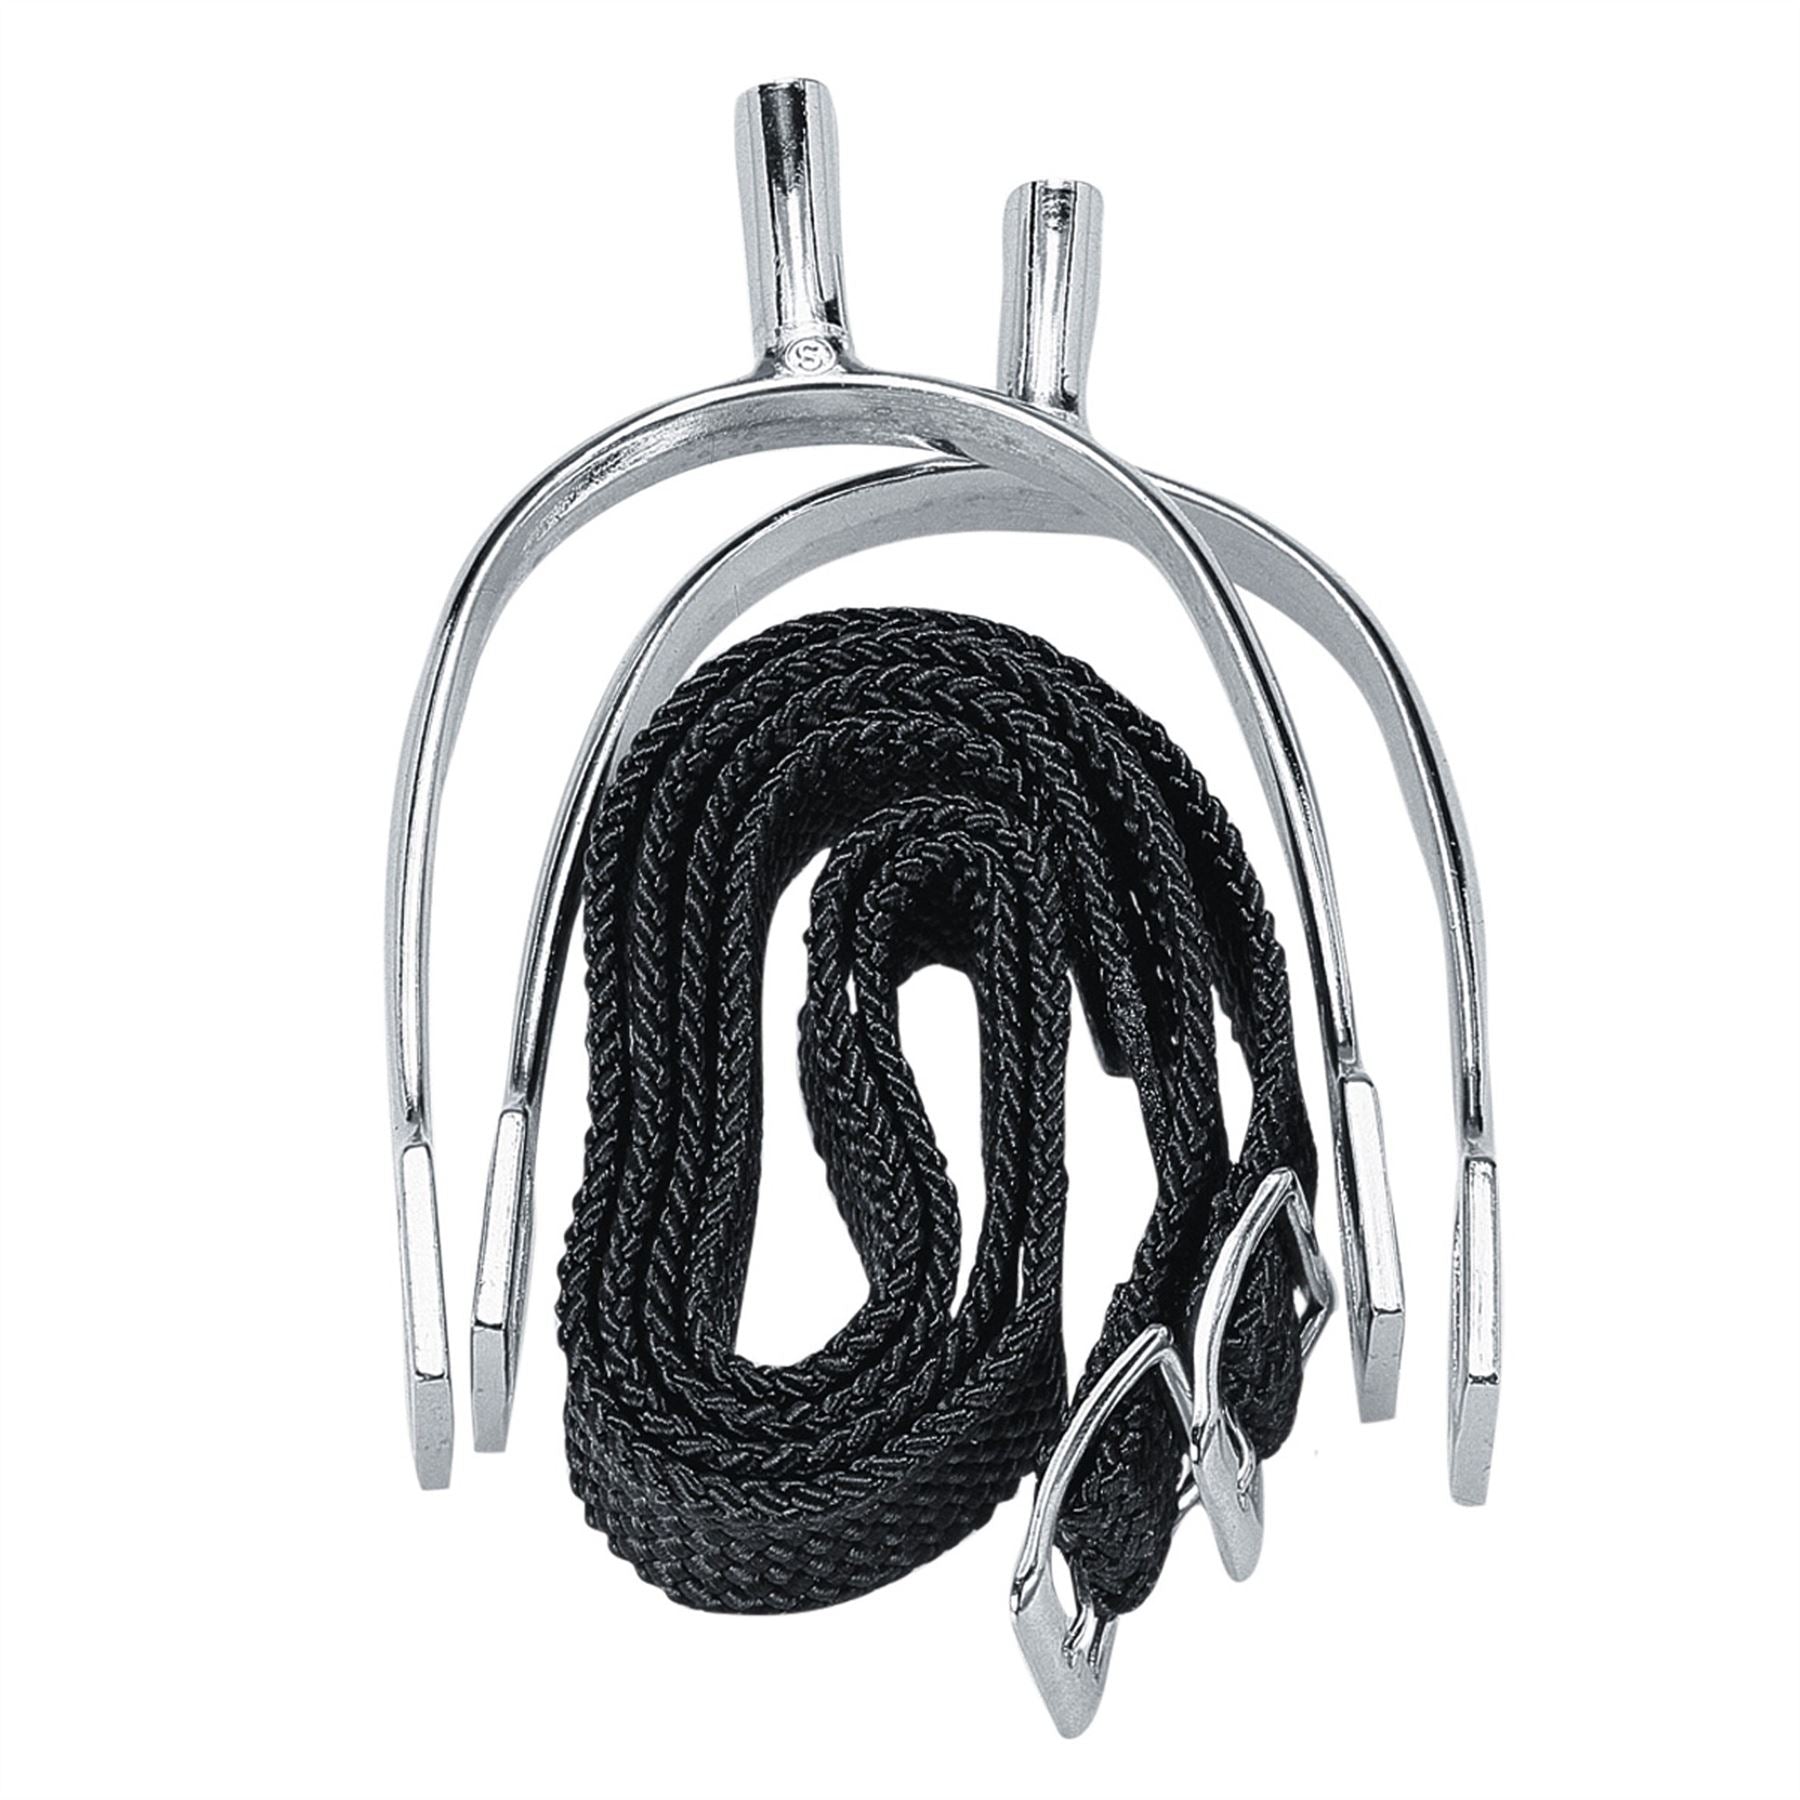 Korsteel P.O.W. Never Rust Spurs with Straps - Just Horse Riders